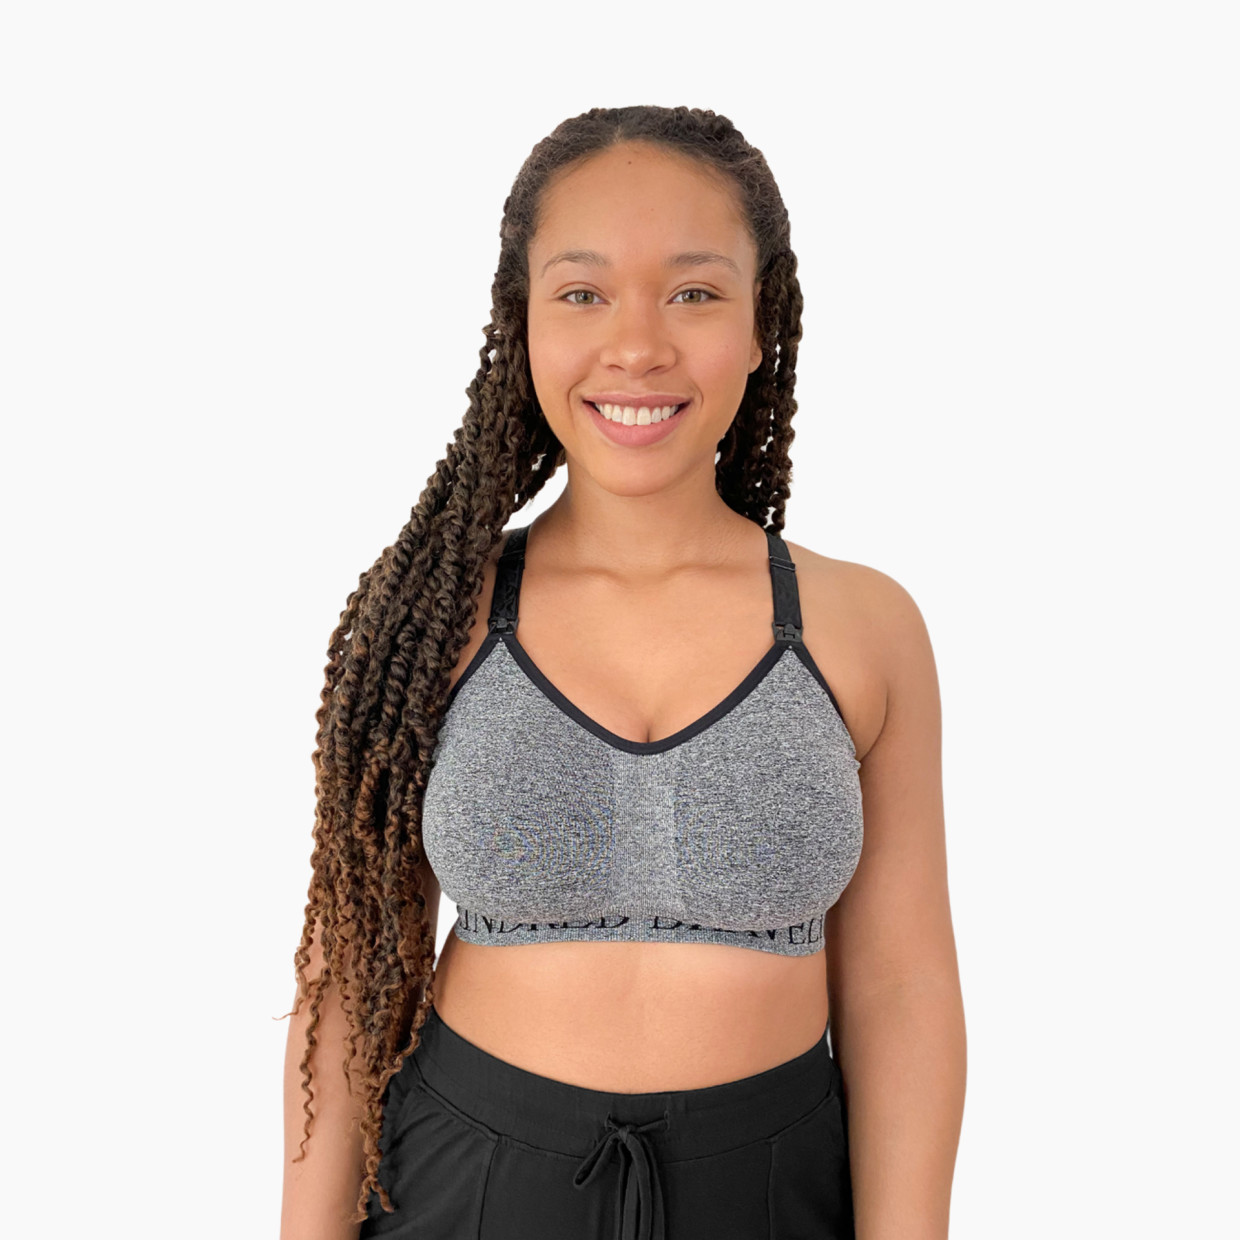 Kindred Bravely Sublime Support Low Impact Nursing & Maternity Sports Bra -  Grey Heather, Small